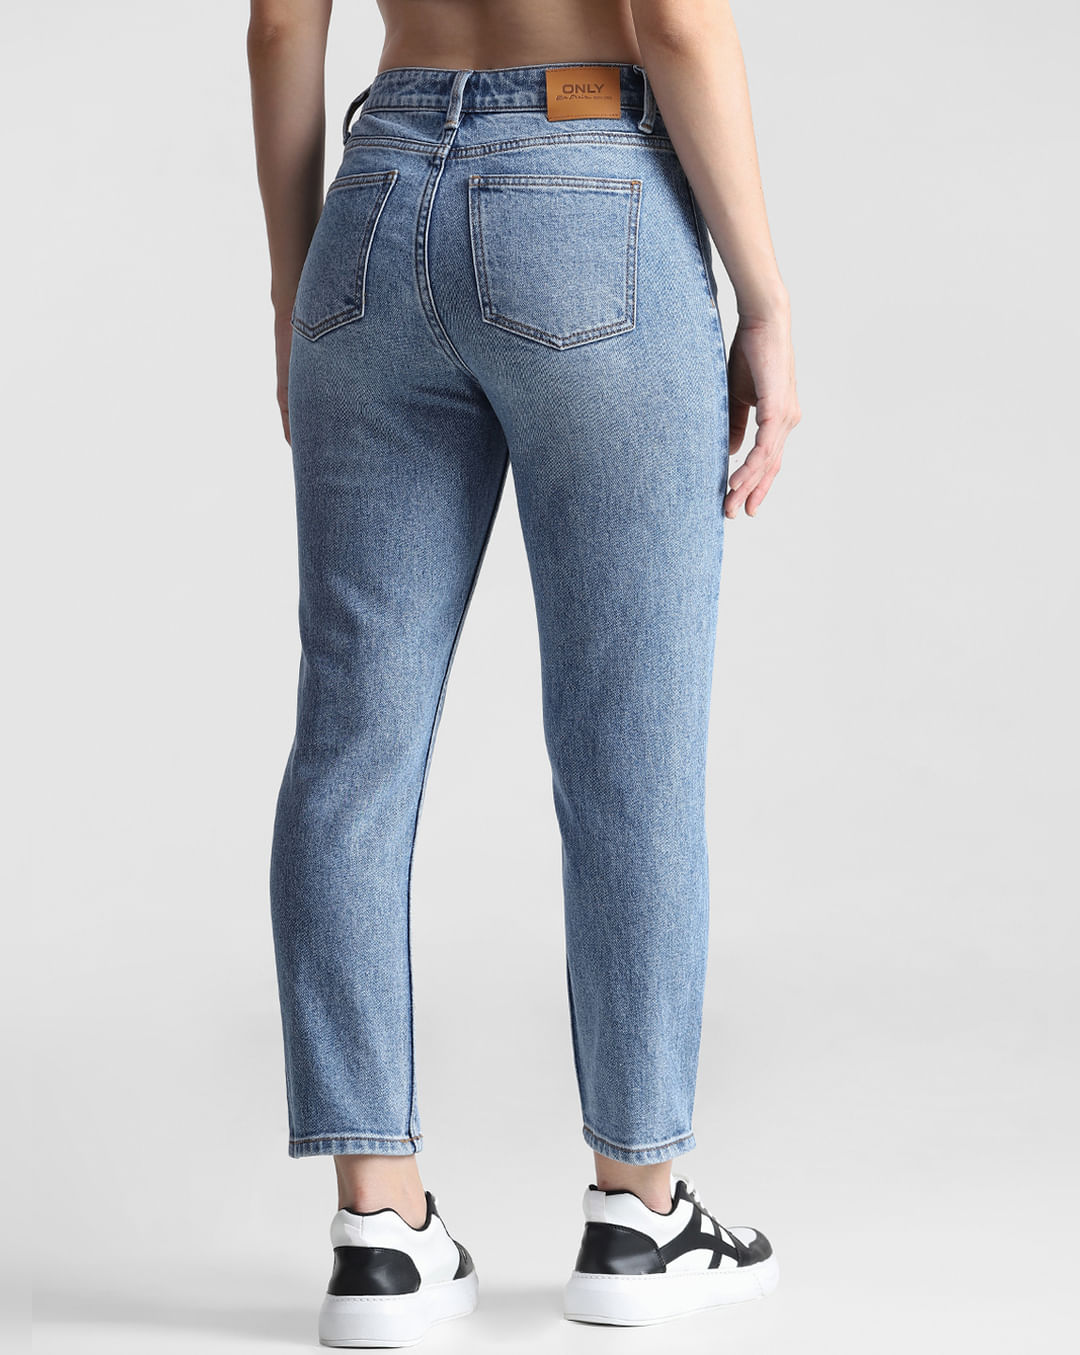 PacSun Women's Black Mom Jeans - 90s Throwback India